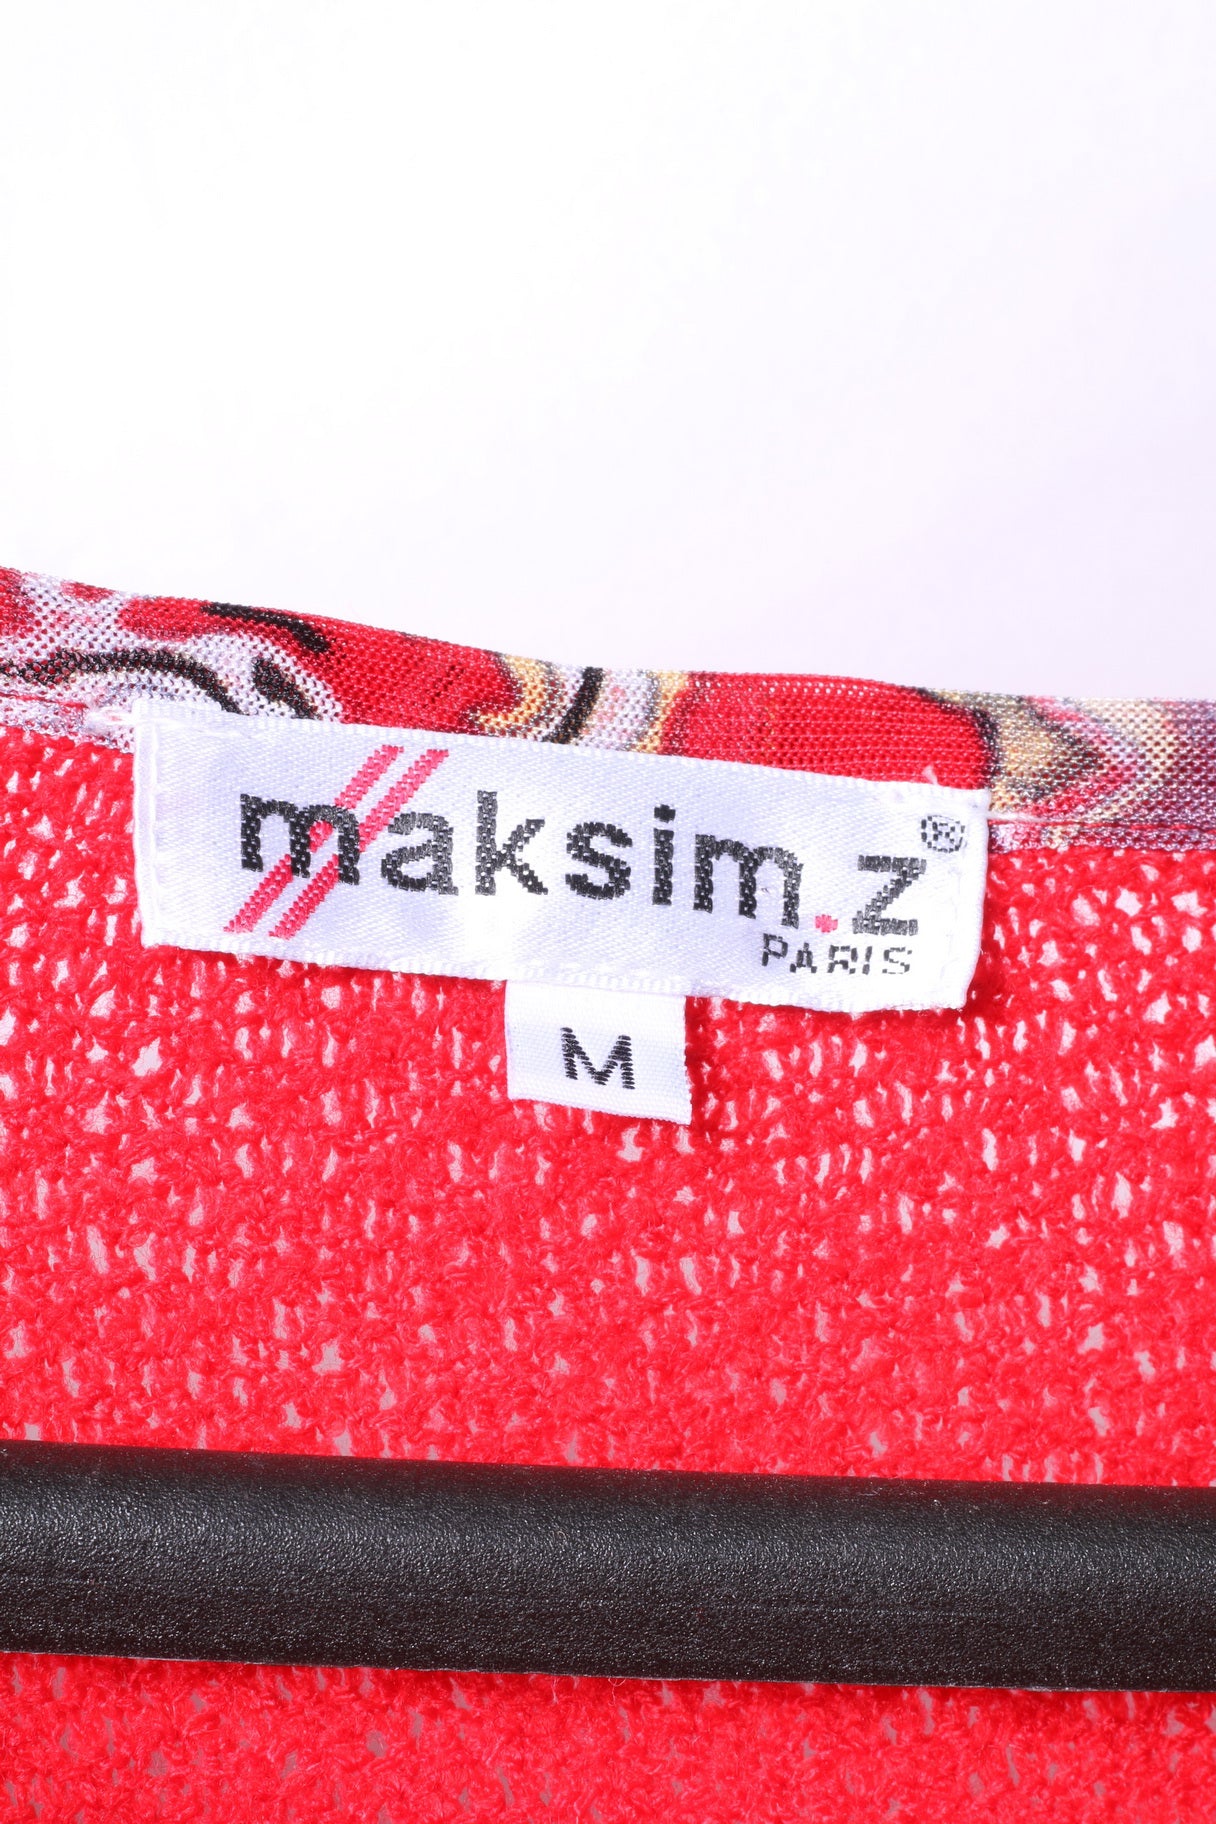 Maksim .Z Paris Womens M Jumper Red Acrylic Emroidered Abstract Sweater